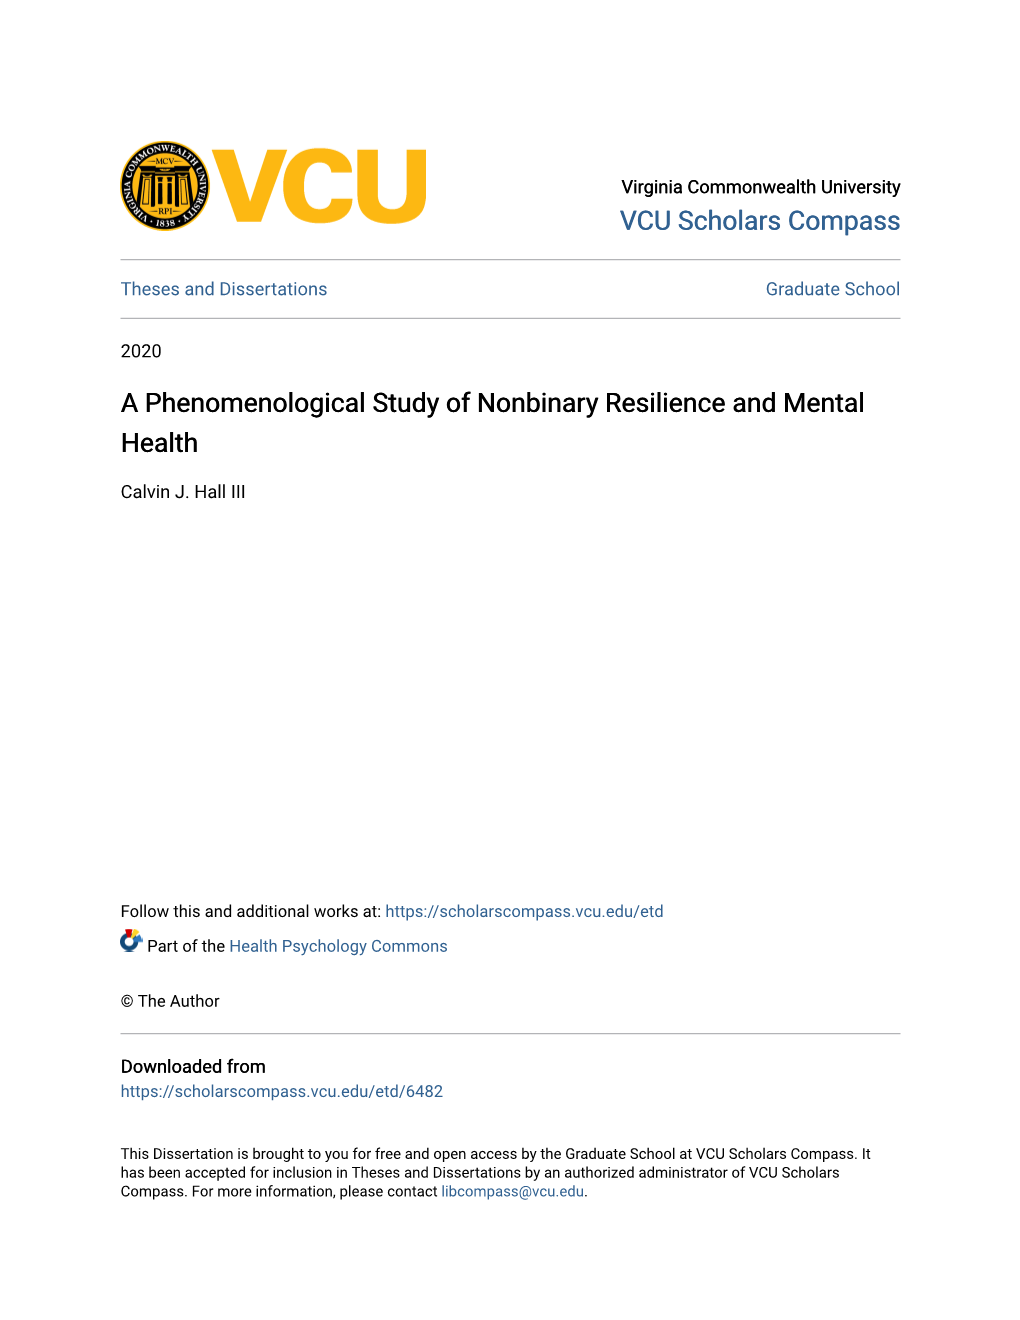 A Phenomenological Study of Nonbinary Resilience and Mental Health